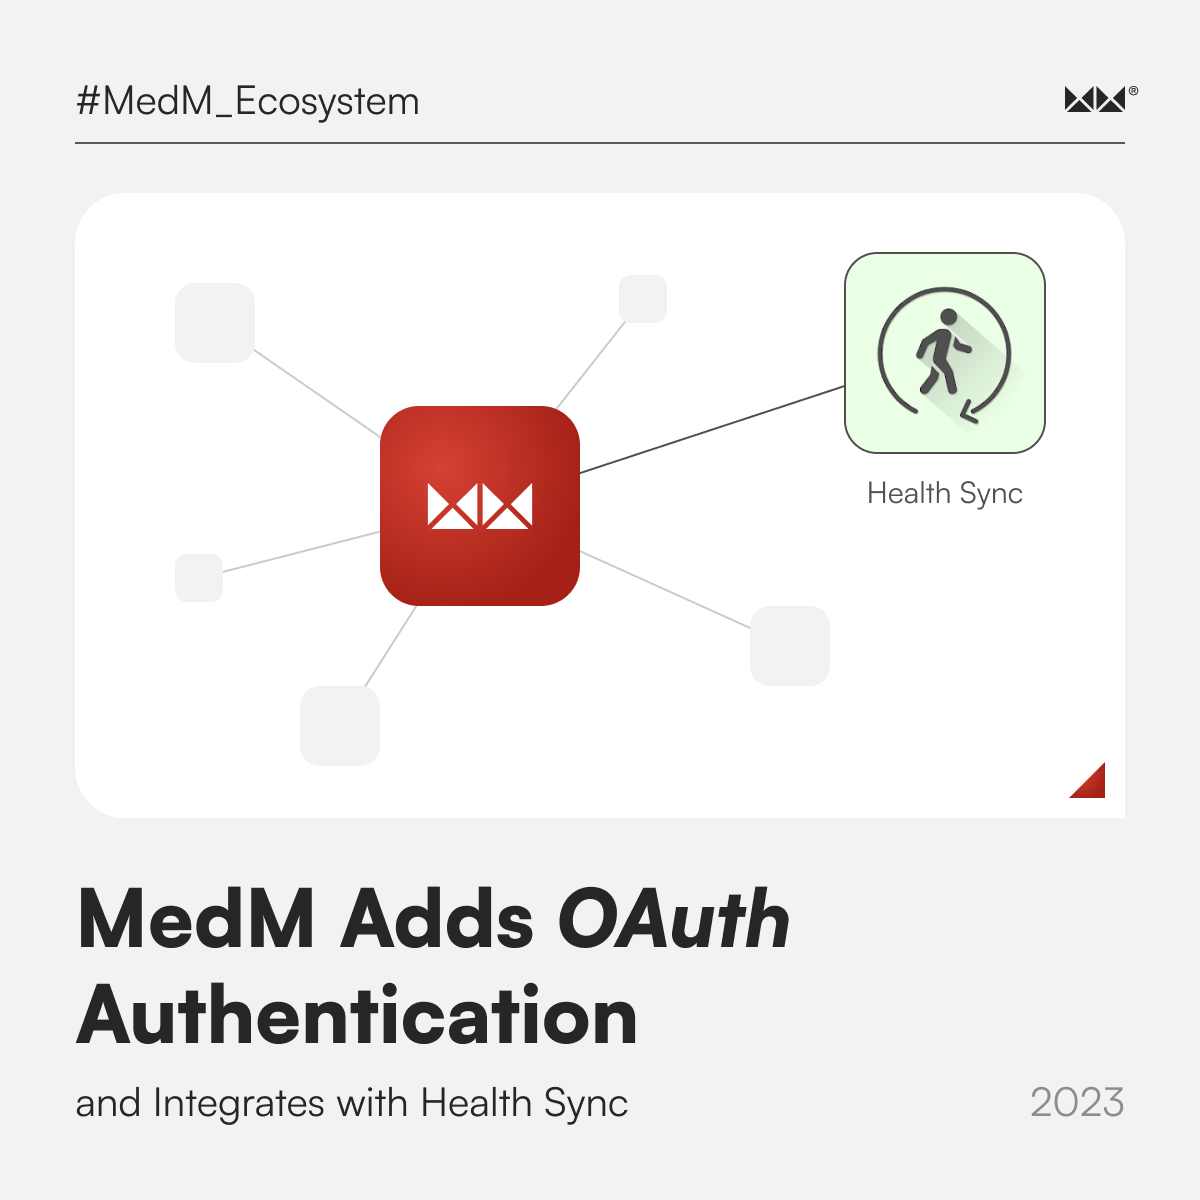 MedM Adds OAuth Authentication and Integrates with Health Sync 